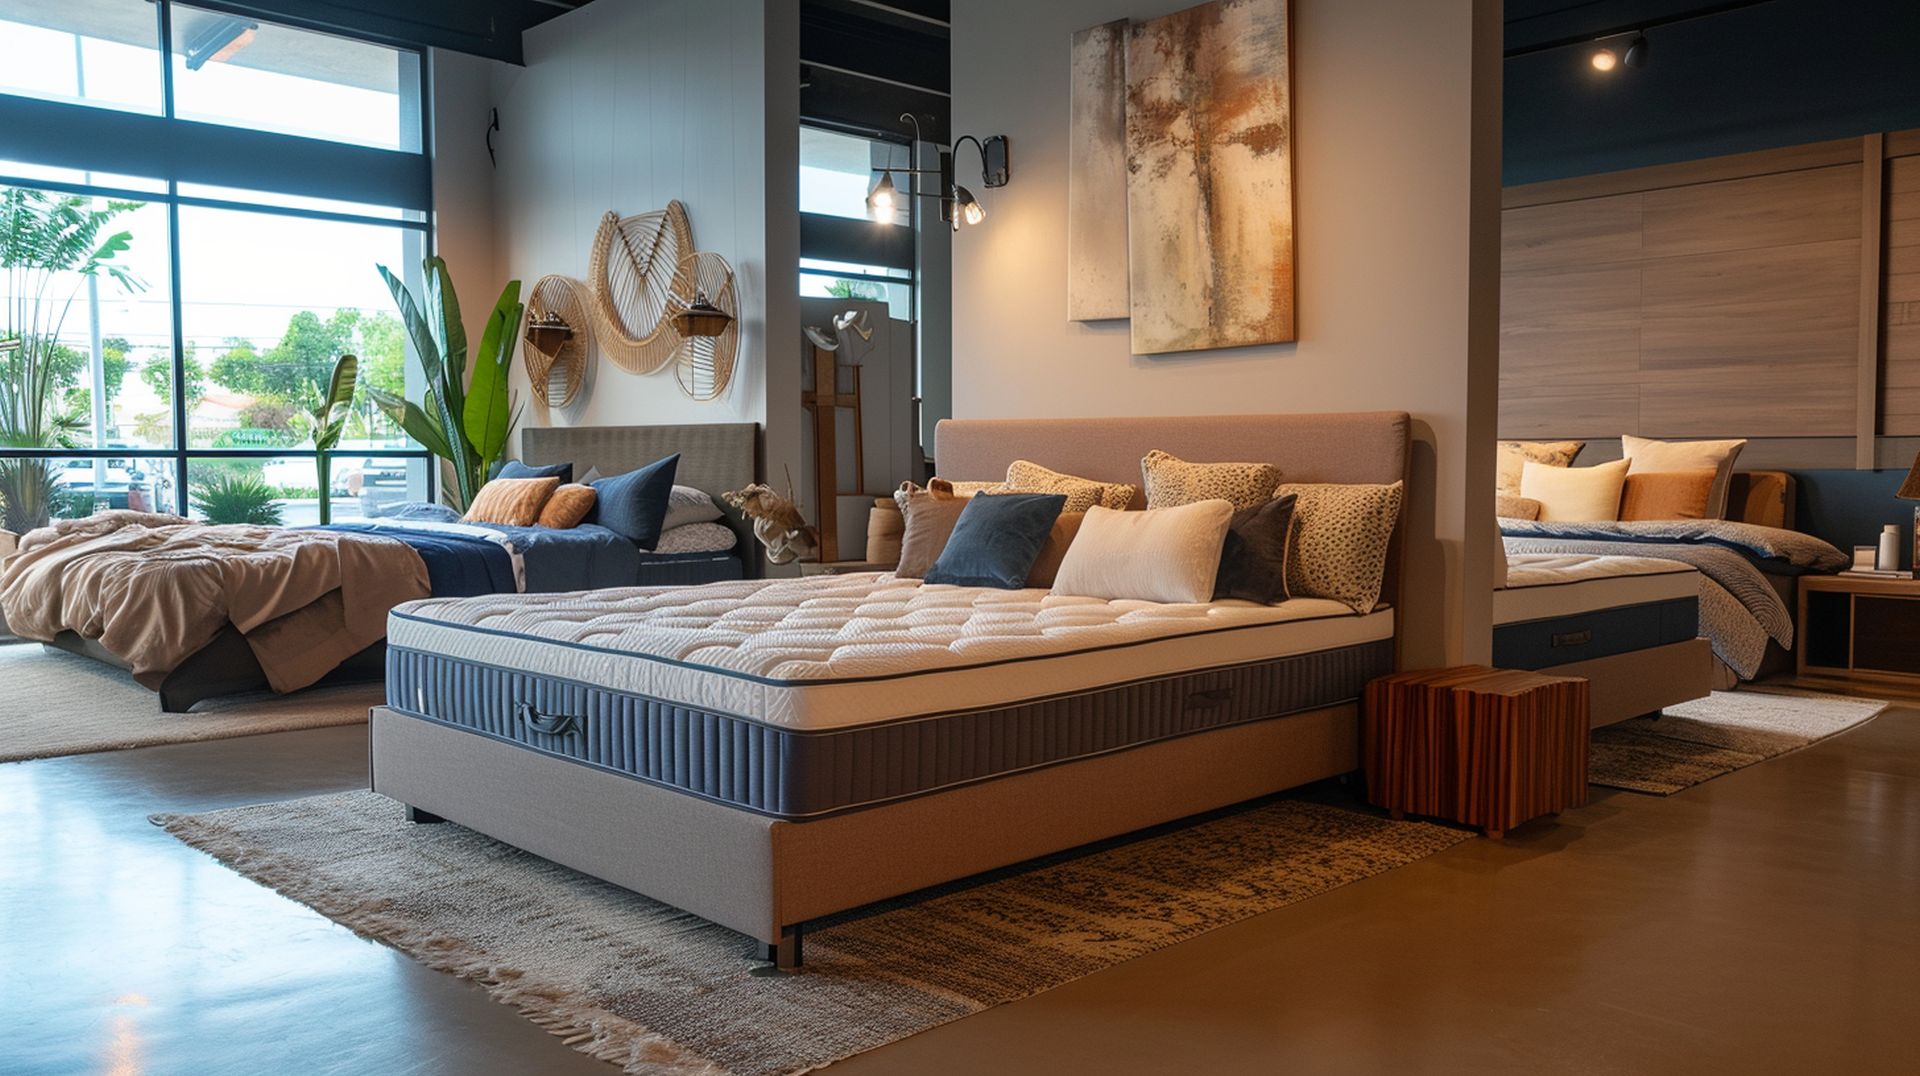 If you're looking for a new bed, mattress stores in Tucson offer the best customer and delivery service, financing, and warranties in Arizona